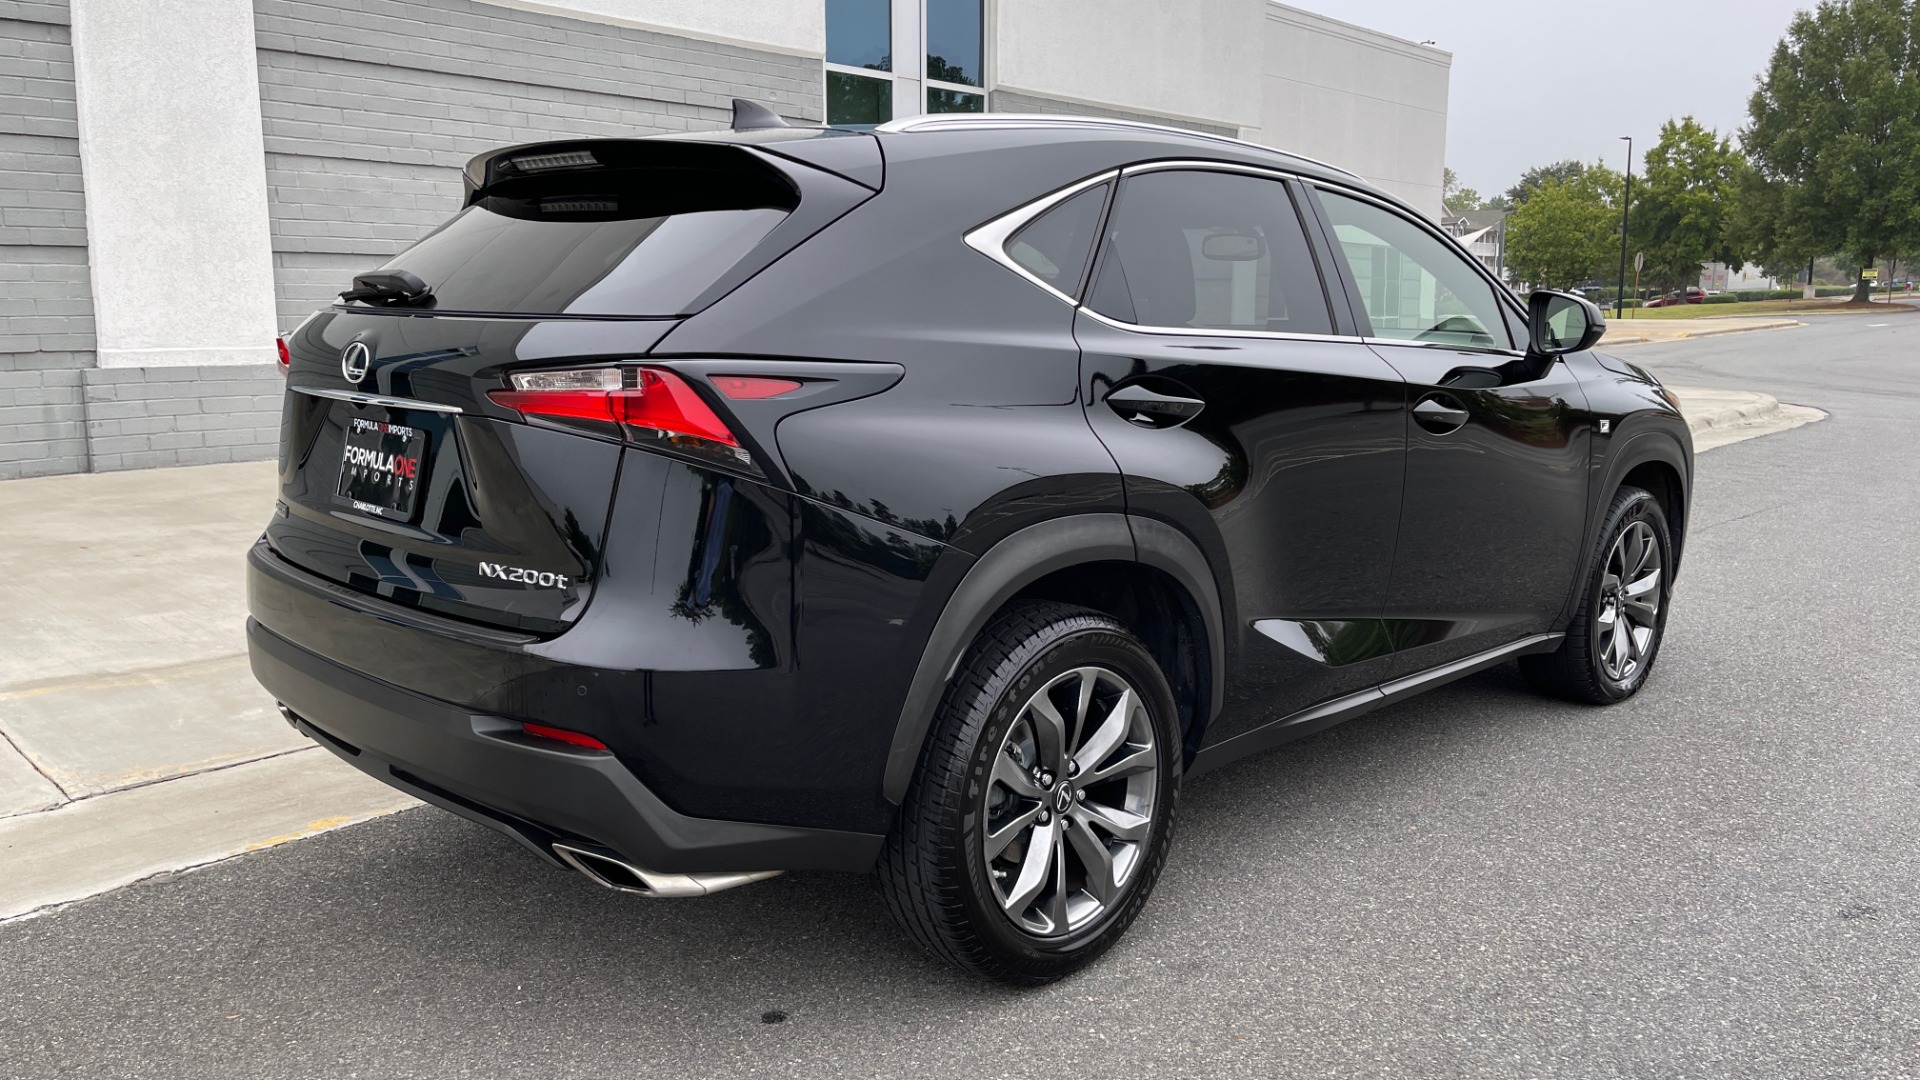 Used 2017 Lexus NX PREMIUM F-SPORT / 2.0L TURBO / BSM / PARK ASST / REARVIEW for sale Sold at Formula Imports in Charlotte NC 28227 2